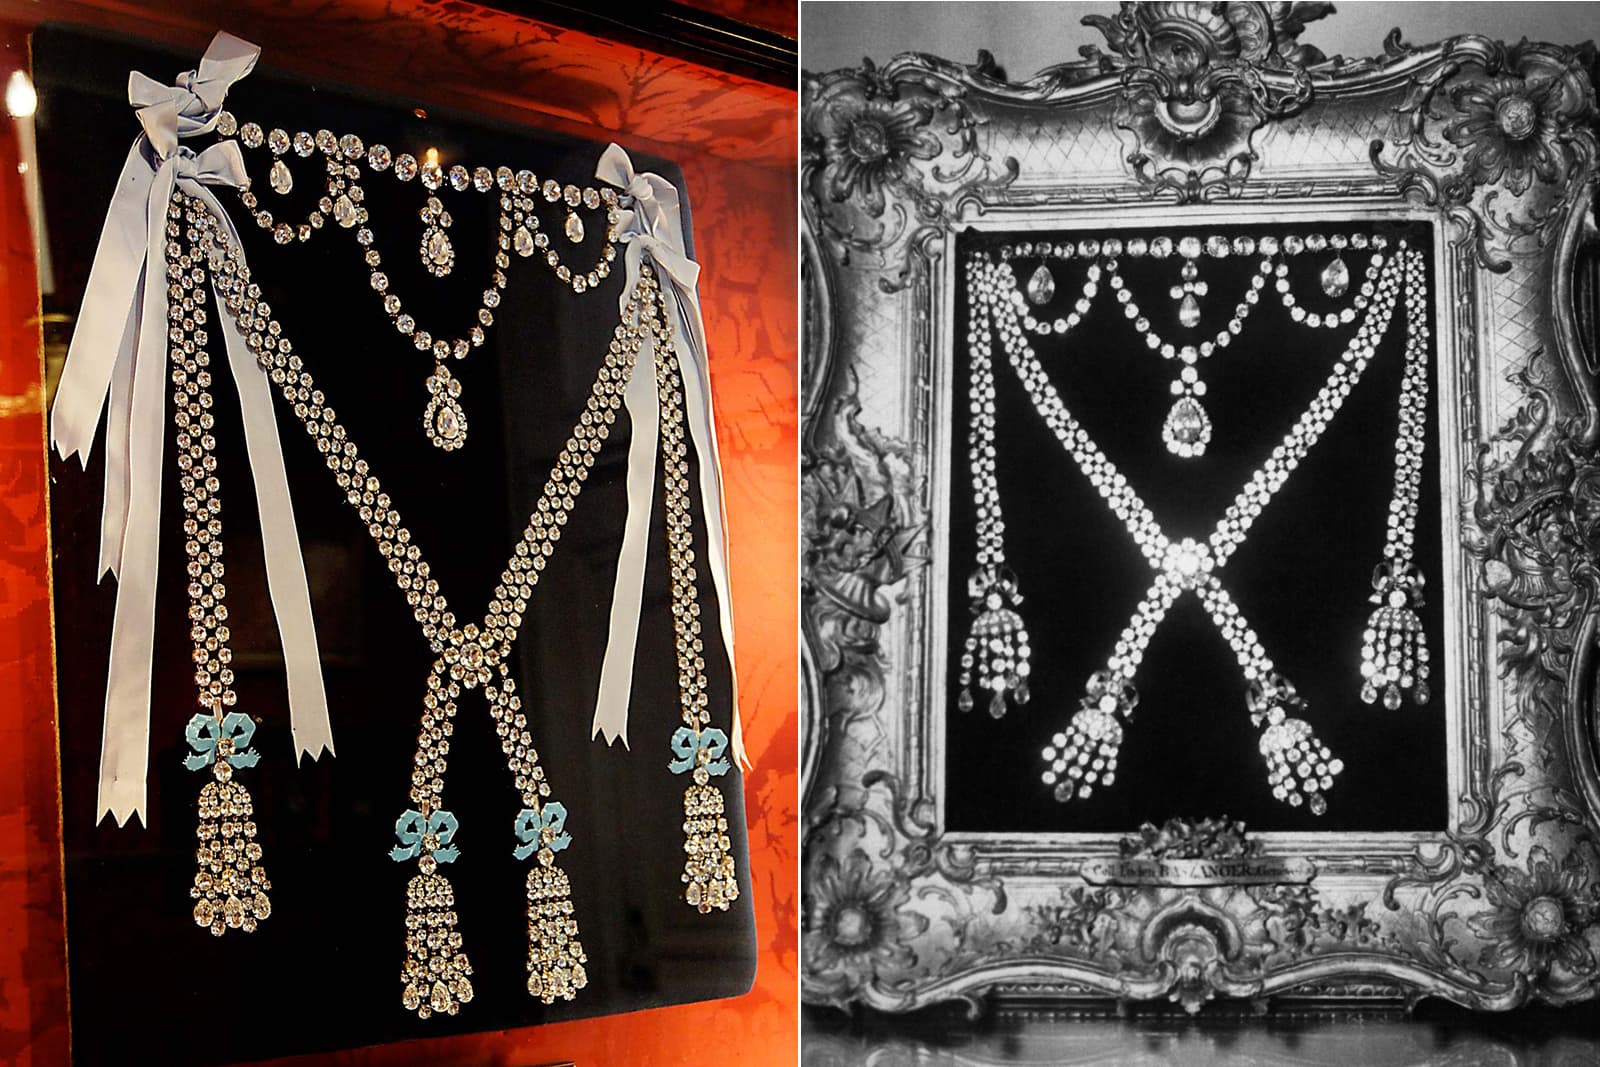 Marie Antionette's Diamond Necklace: The Fraud That Killed A Queen